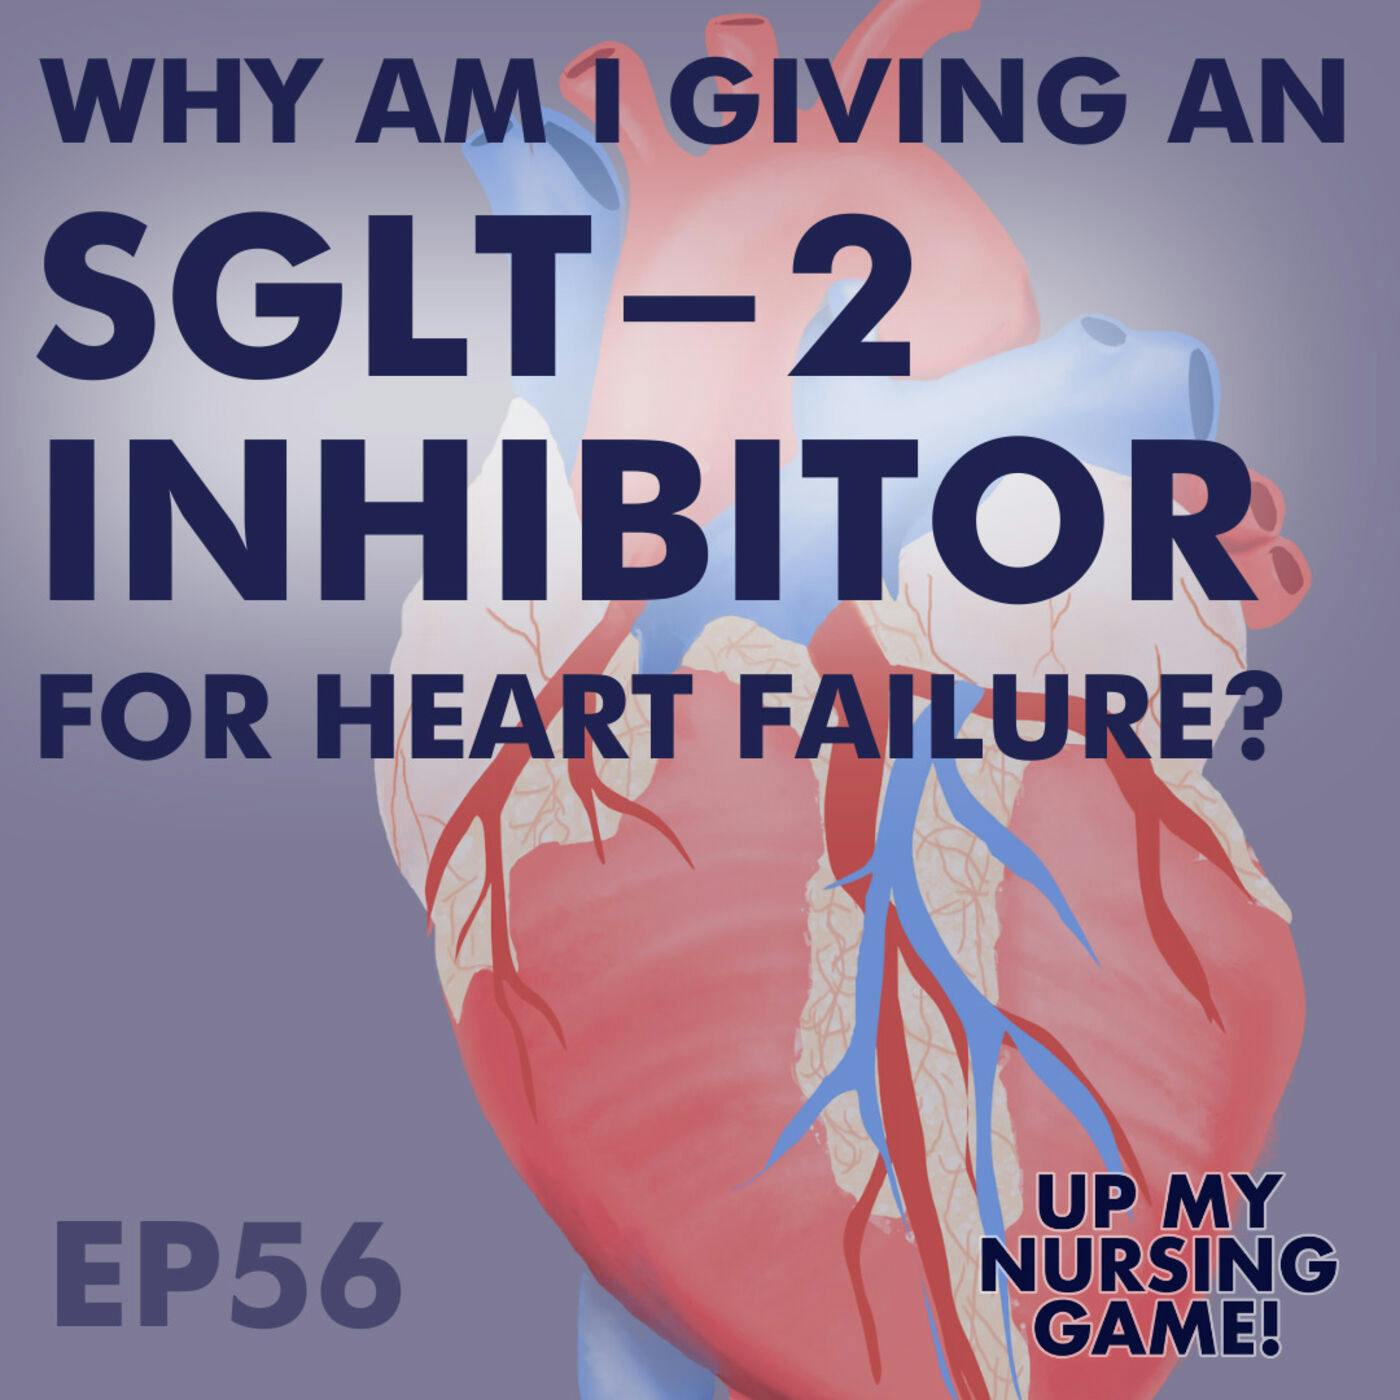 Why am I giving an SGLT-2 inhibitor for heart failure?